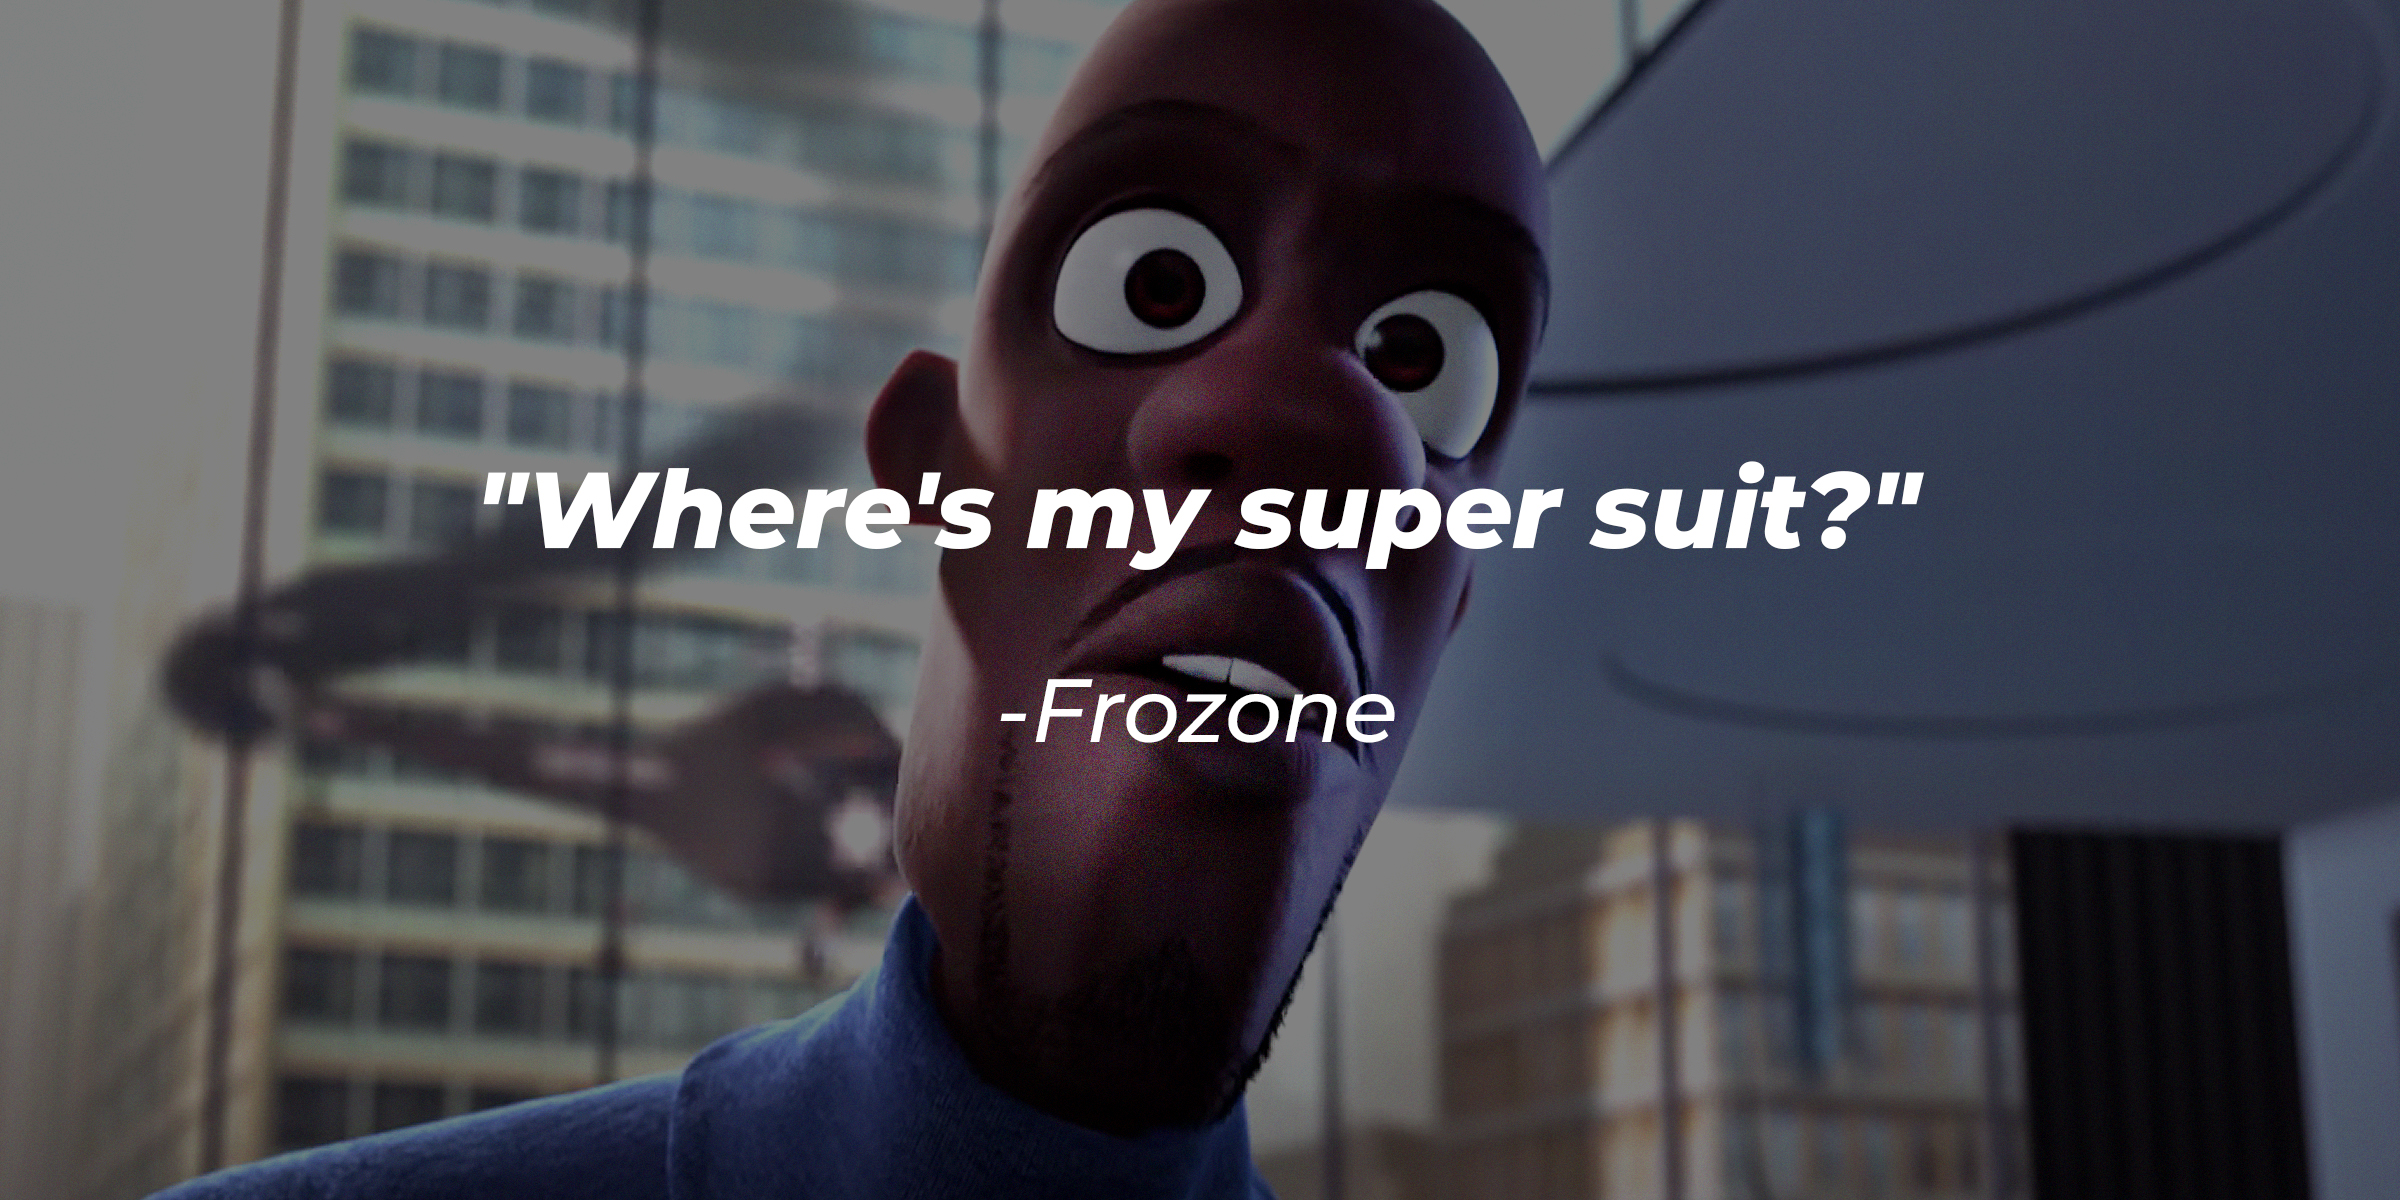 Frozone's quote: "Where's my super suit?" | Source: Youtube.com/pixar